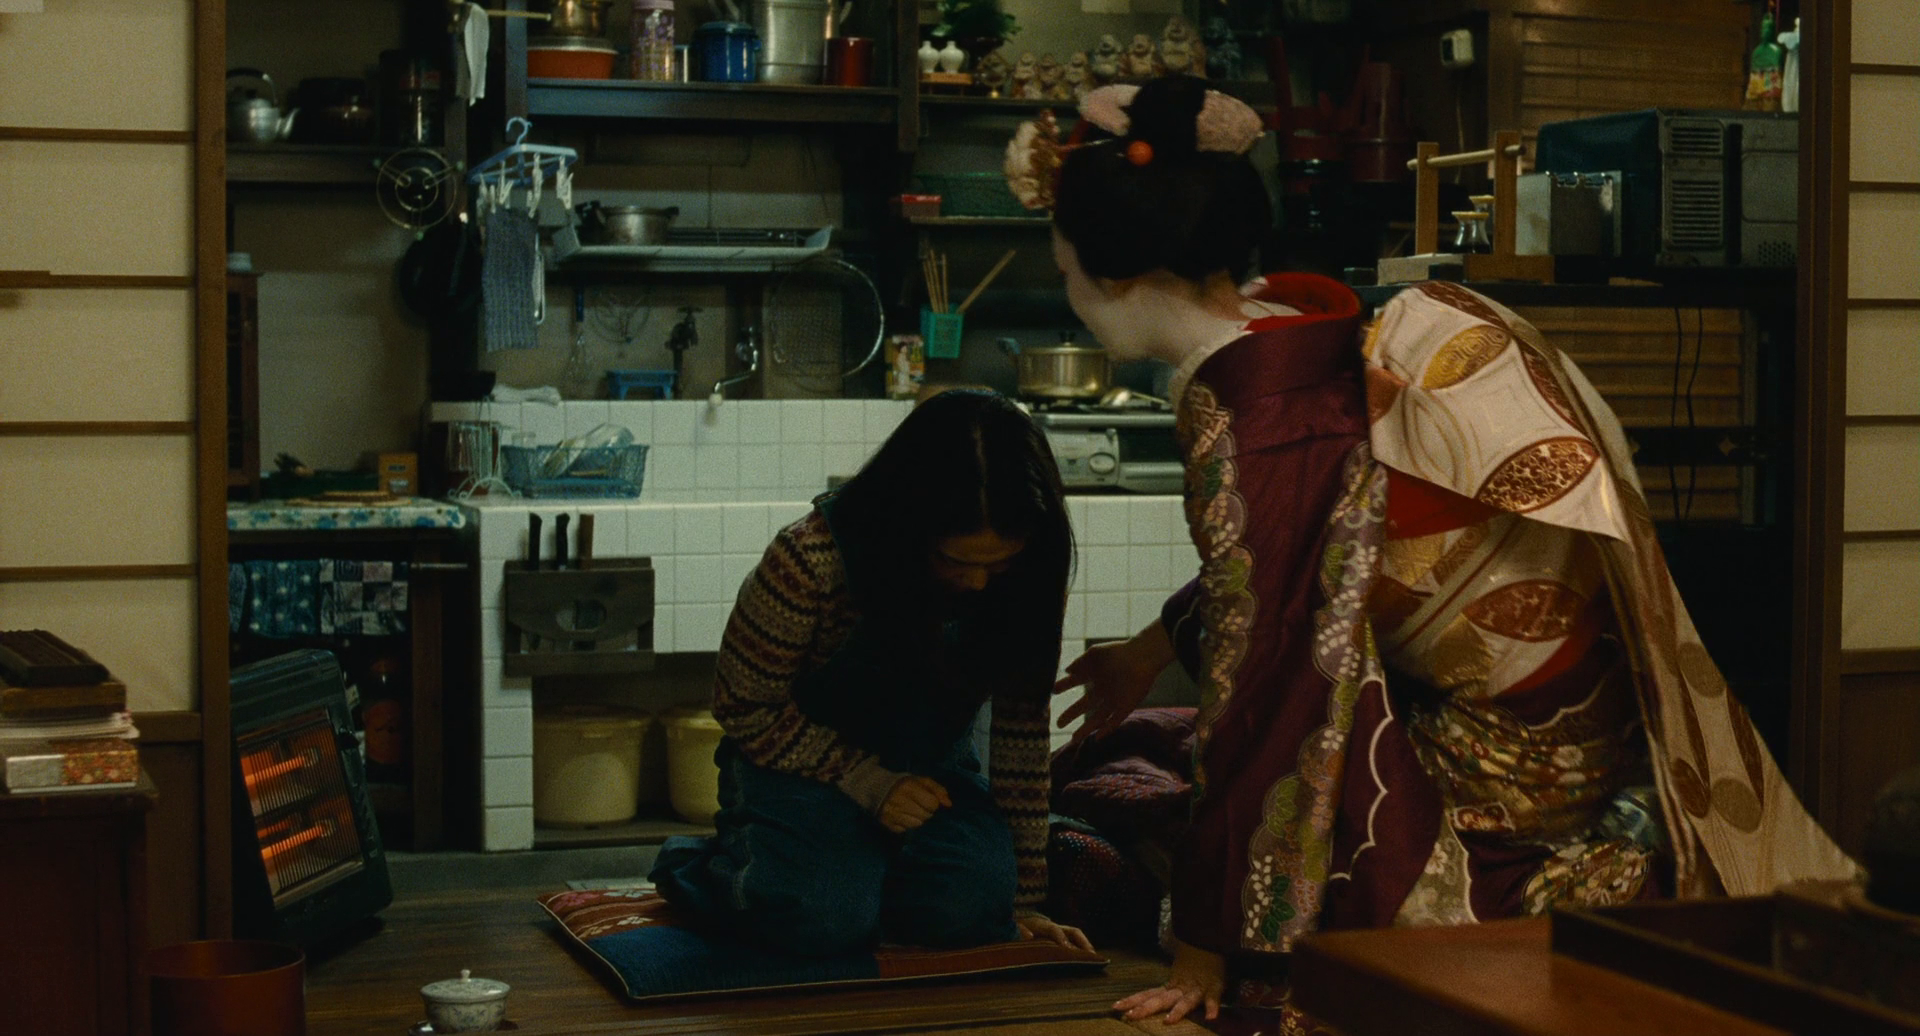  Lady.Maiko.2014.JAPANESE.1080p.BluRay.DTS.x264-WiKi 18.50GB-5.png